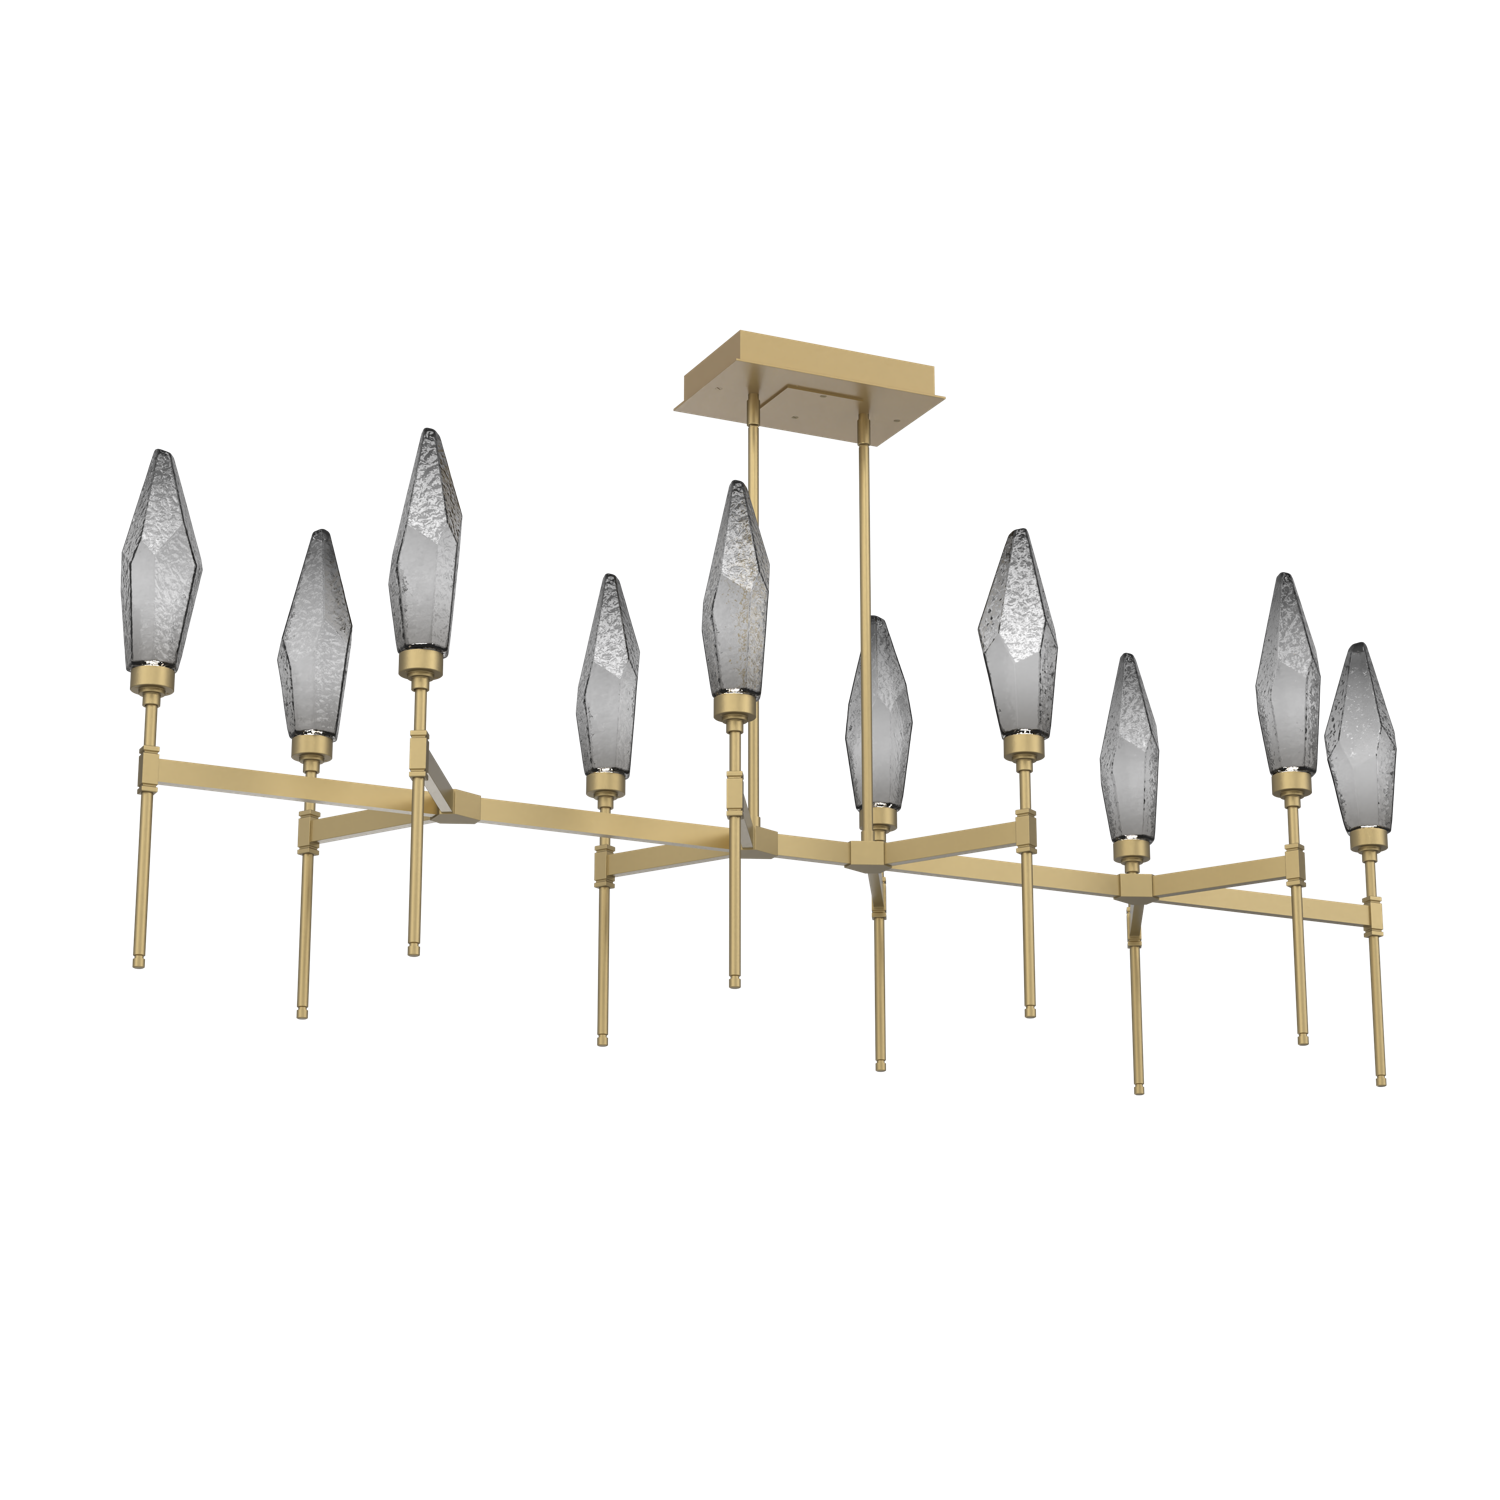 PLB0050-67-GB-CS-Hammerton-Studio-Rock-Crystal-67-inch-linear-belvedere-chandelier-with-gilded-brass-finish-and-chilled-smoke-glass-shades-and-LED-lamping